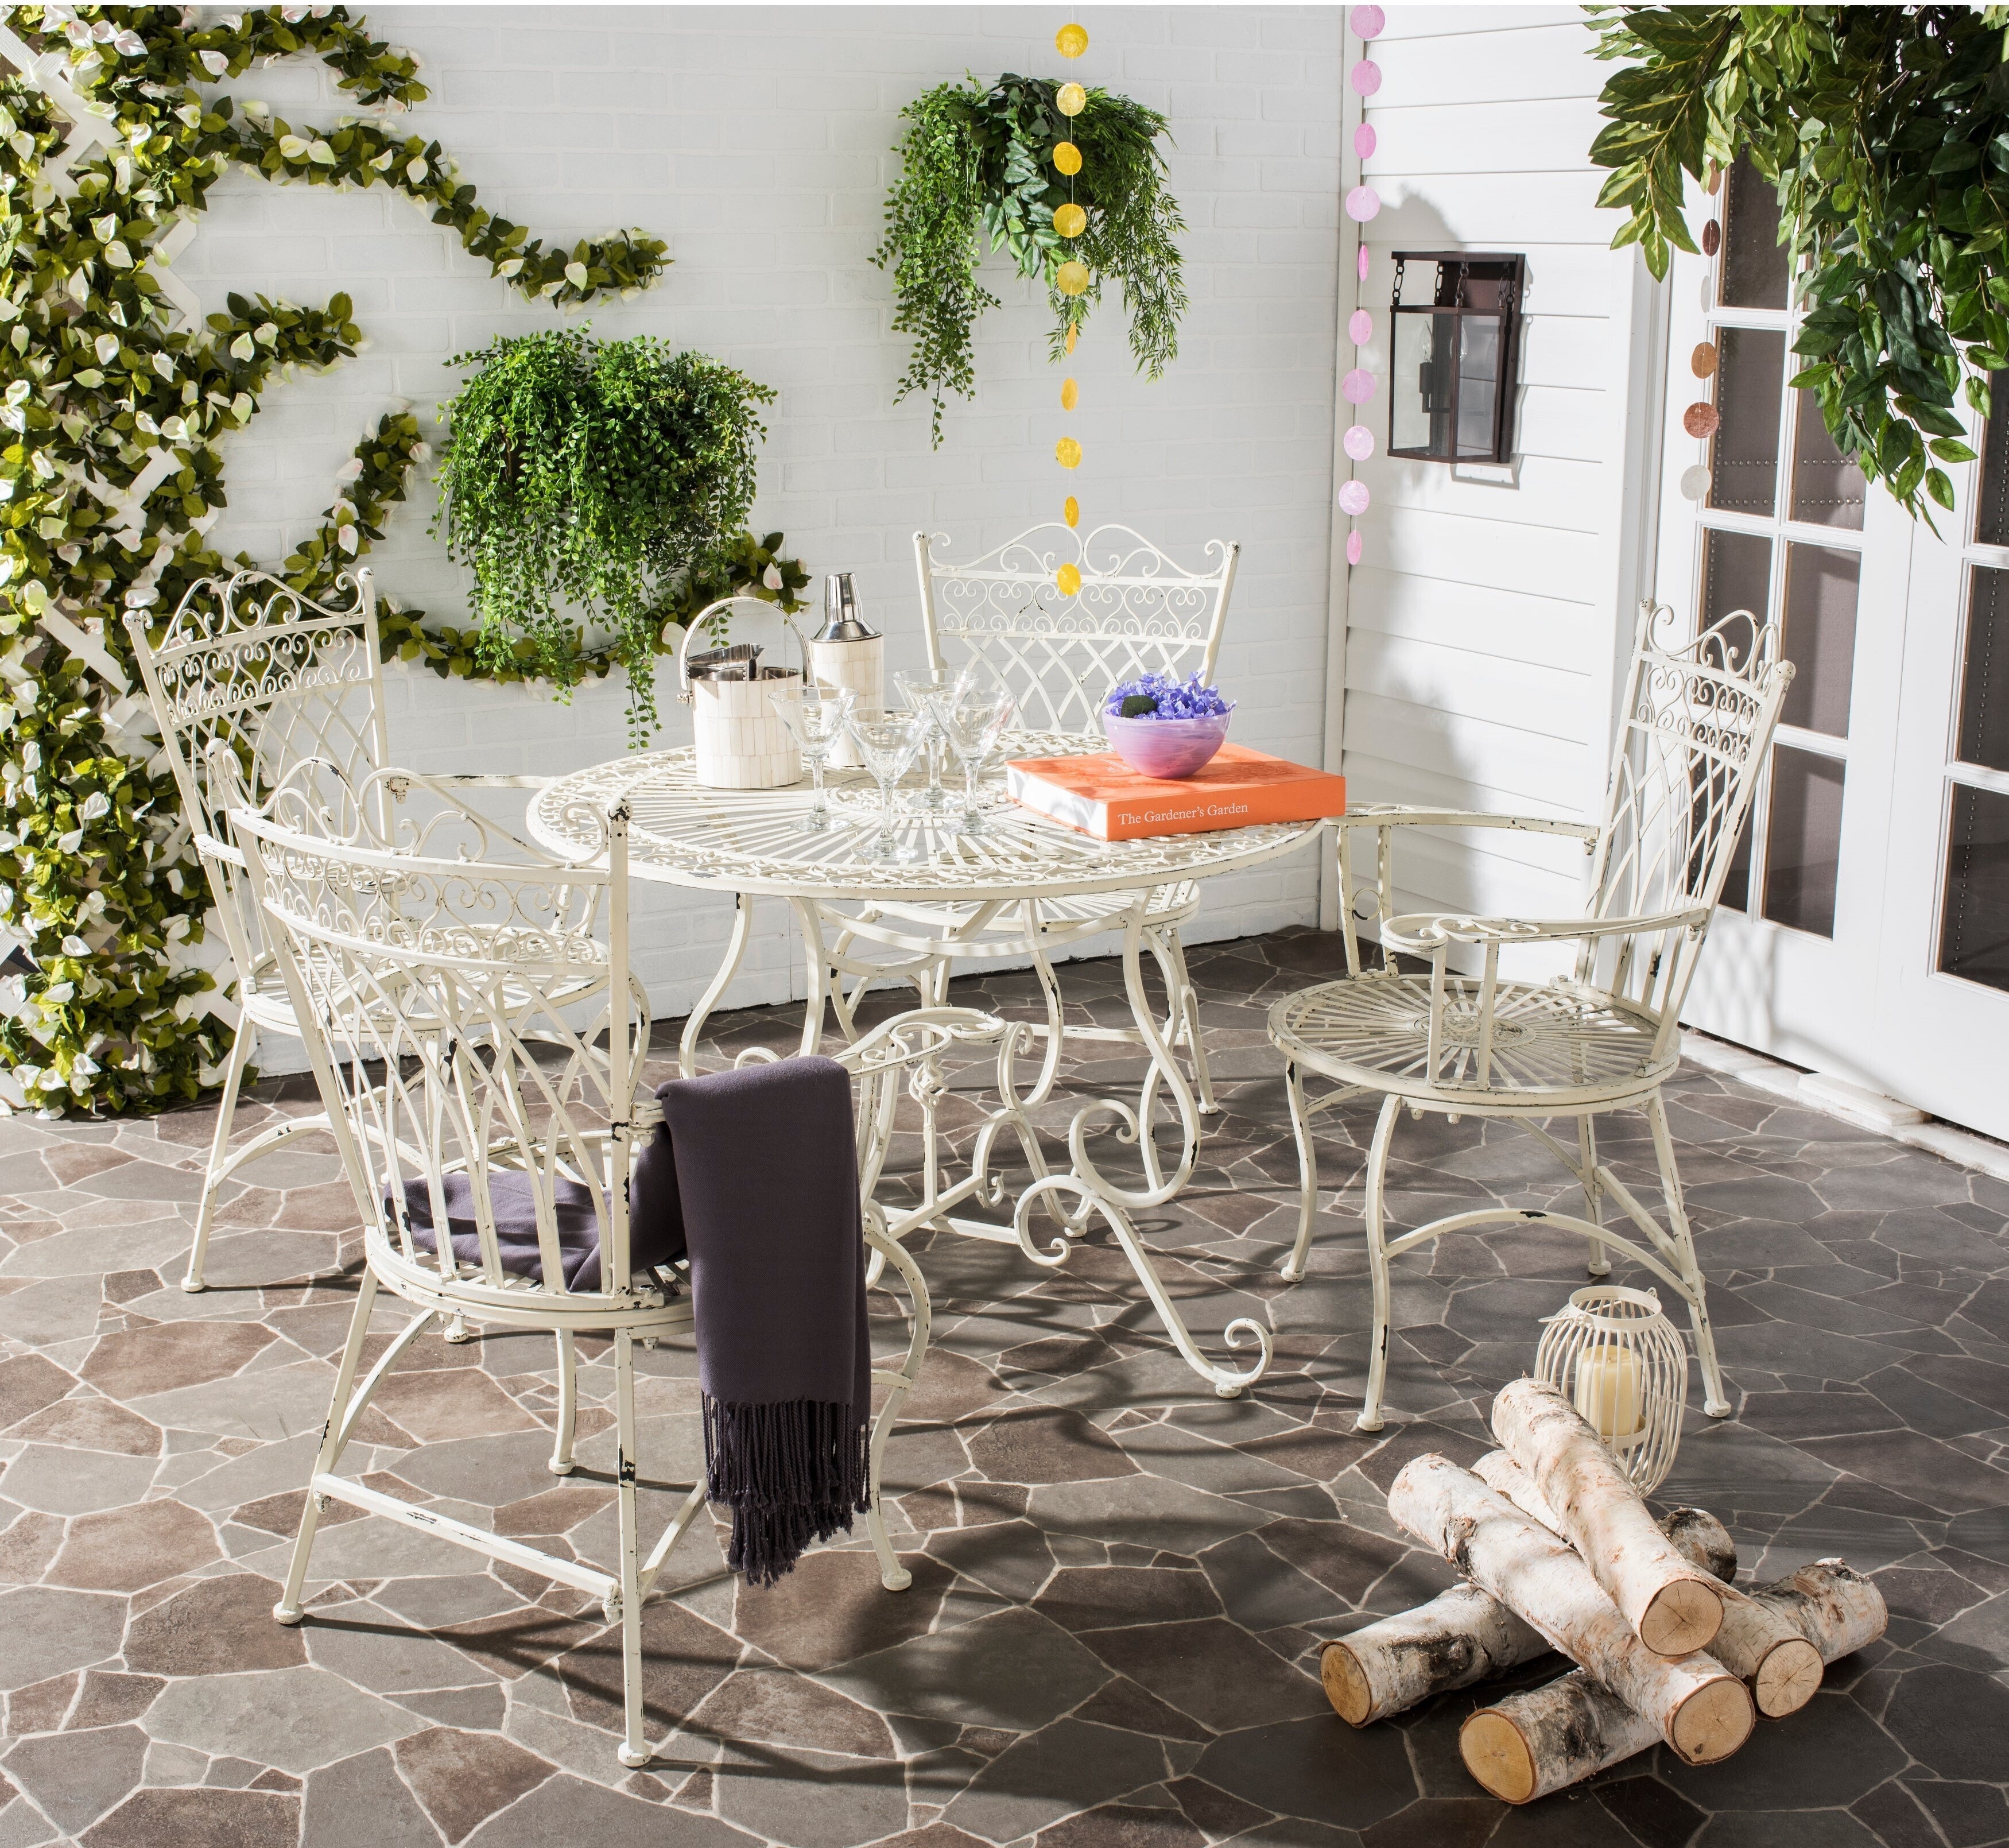 Vintage wrought iron patio furniture with a shabby chic white finish